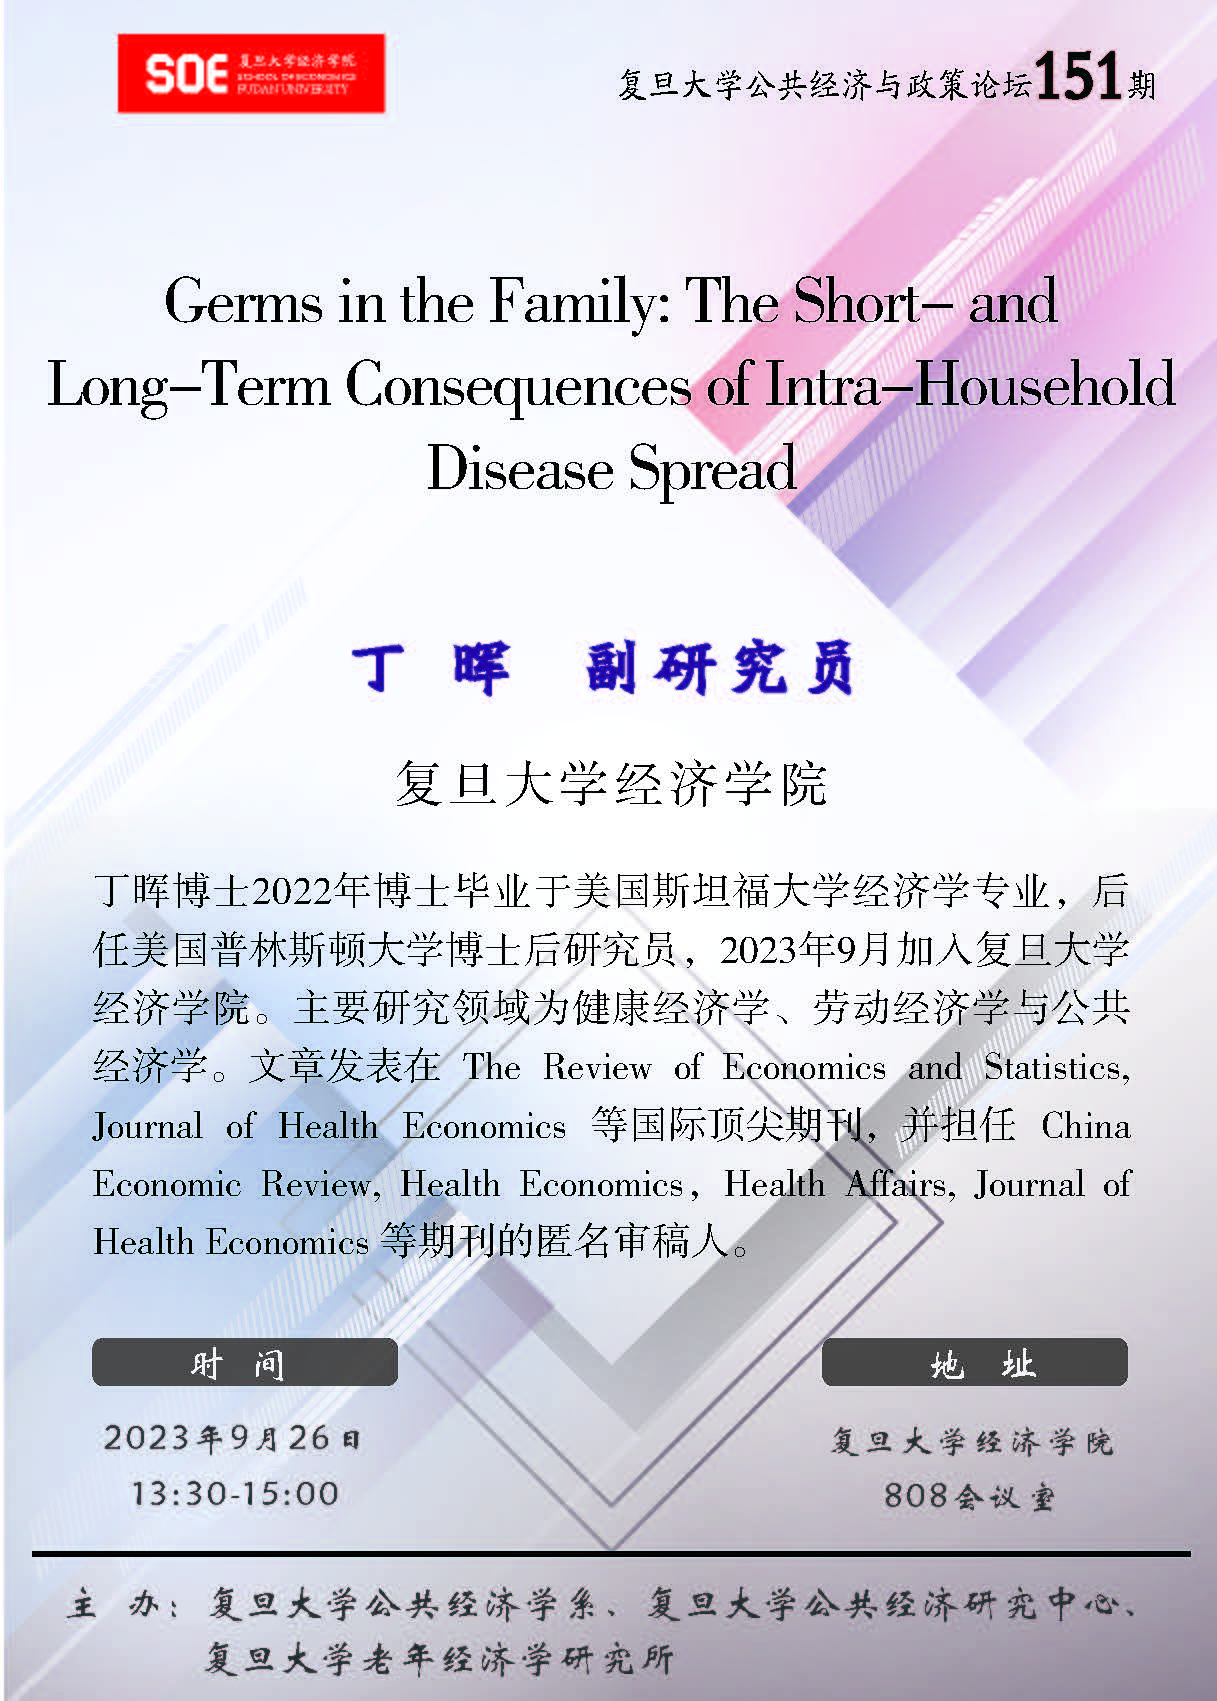 Germs in the Family: The Short- and Long-Term Consequences of 